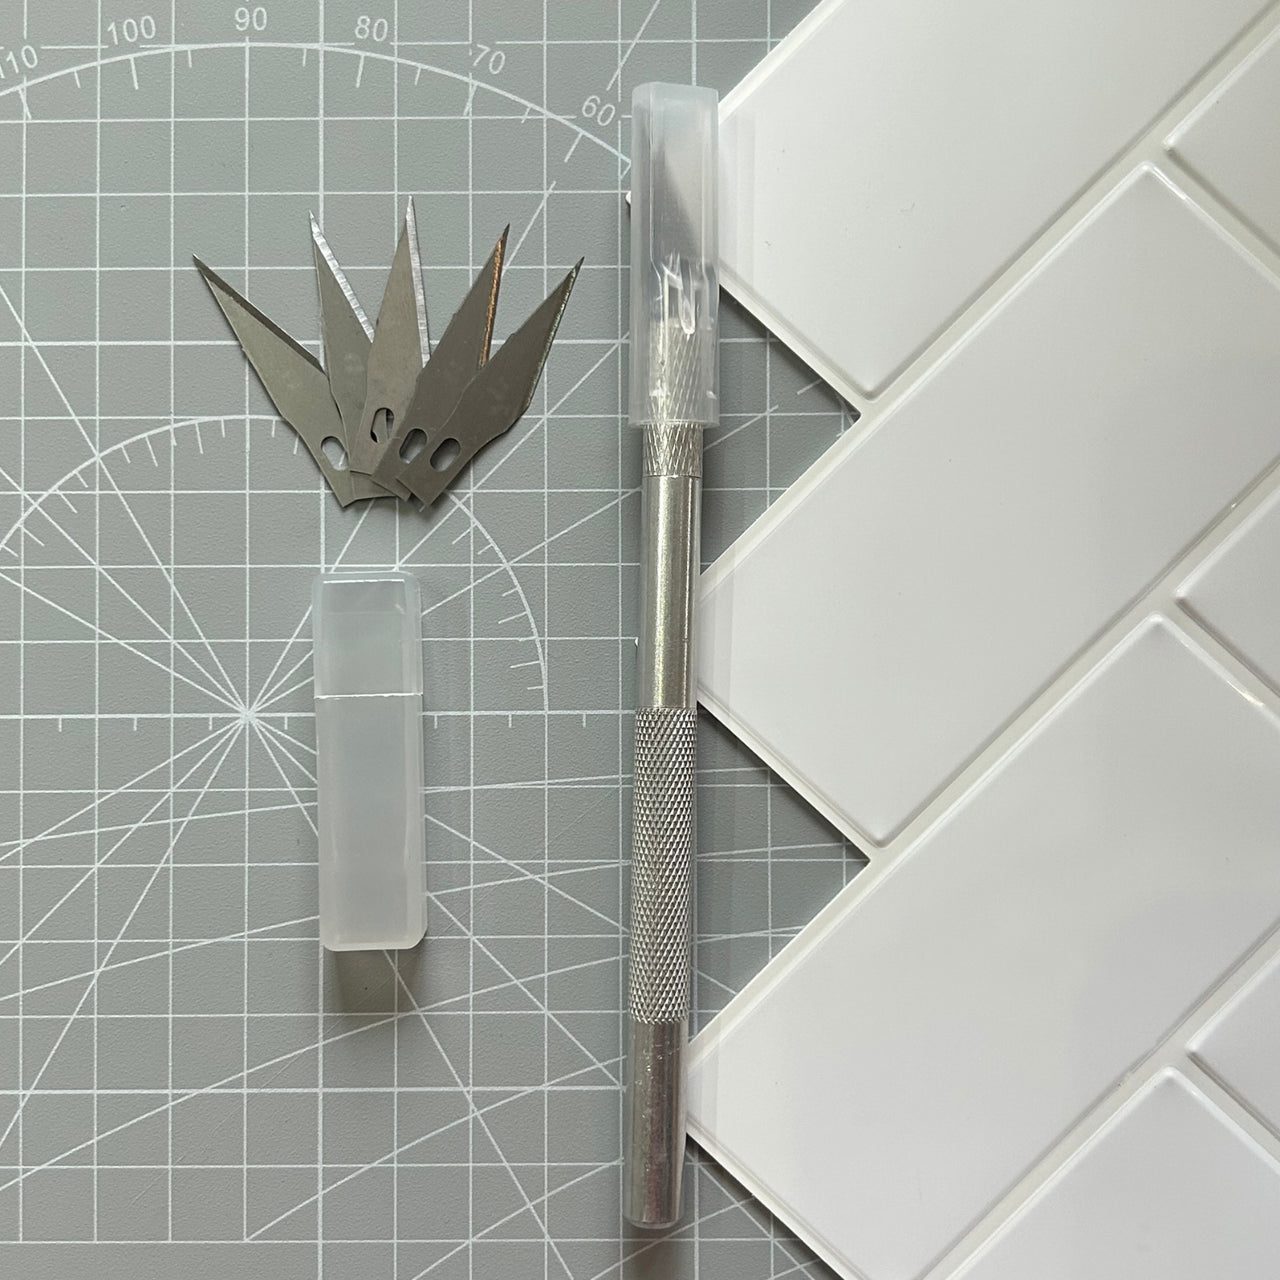 Craft knife for cutting peel and stick wall tiles